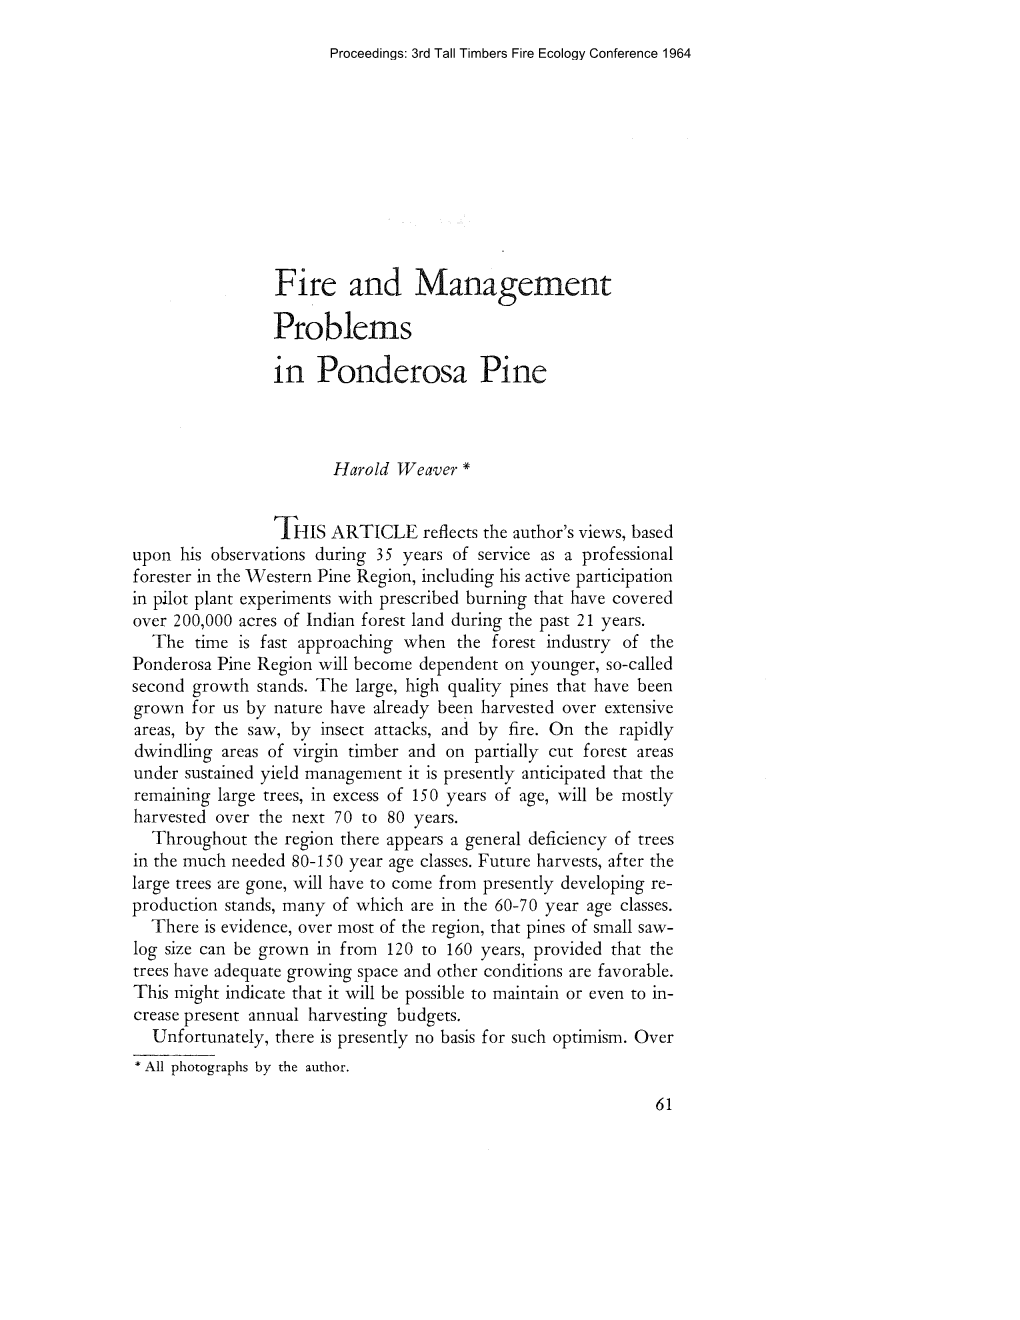 Fire and Management Problems in Ponderosa Pine